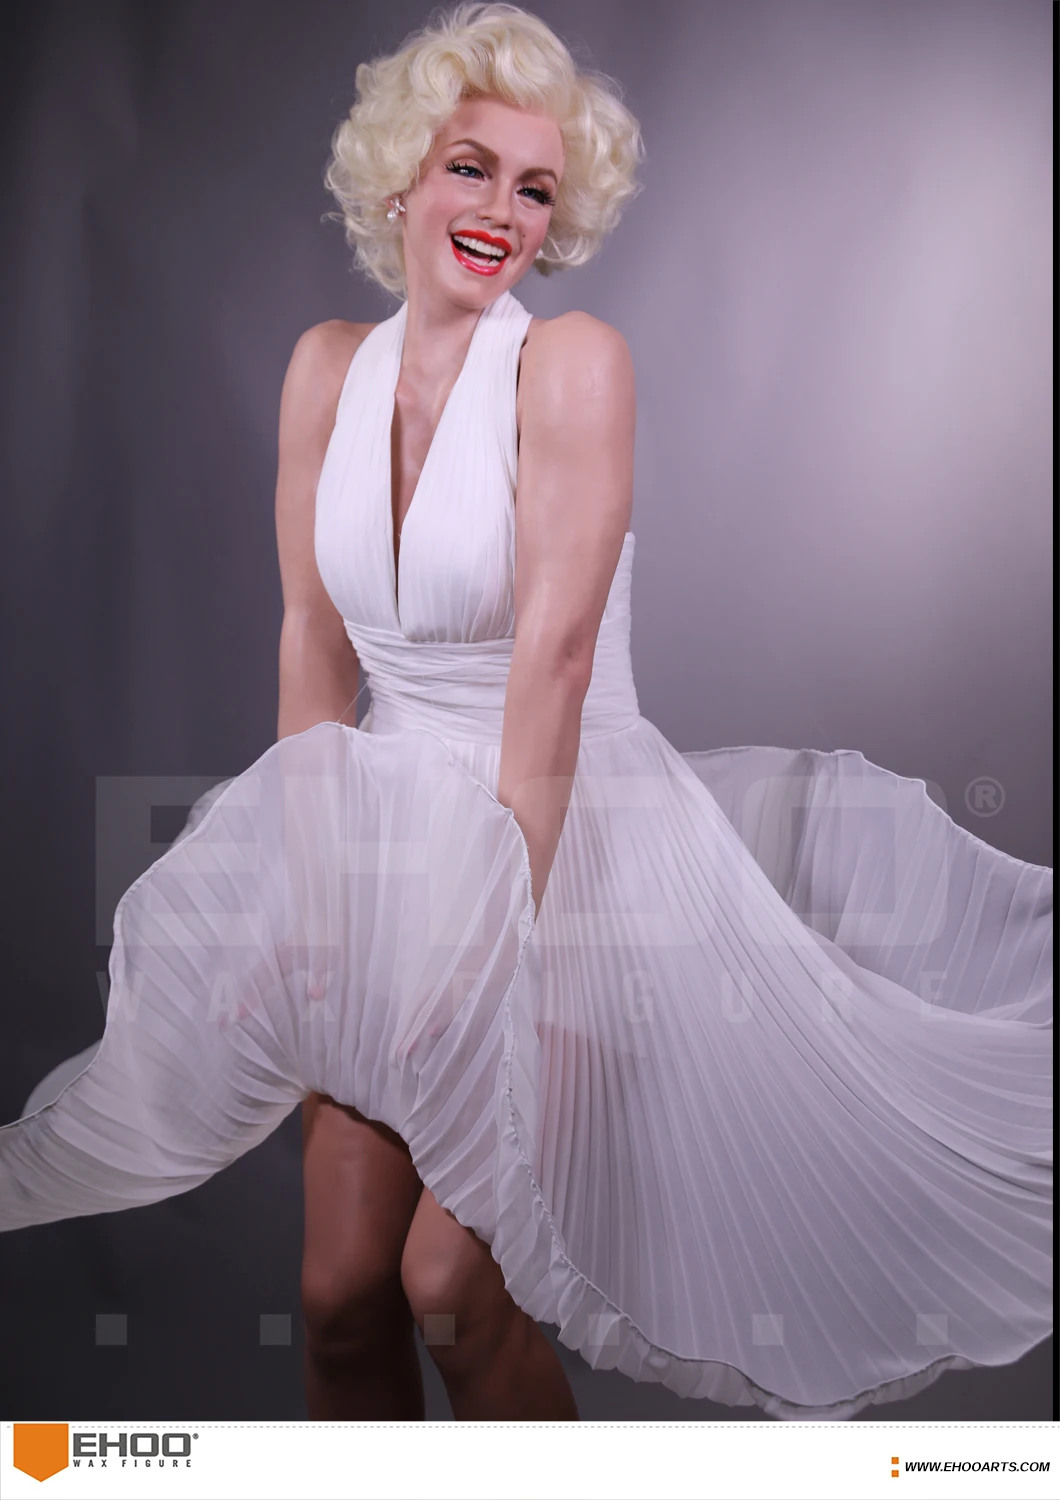 Hollywood Sexy Star Marilyn Monroe Silicon Wax Figure For Sale Buy